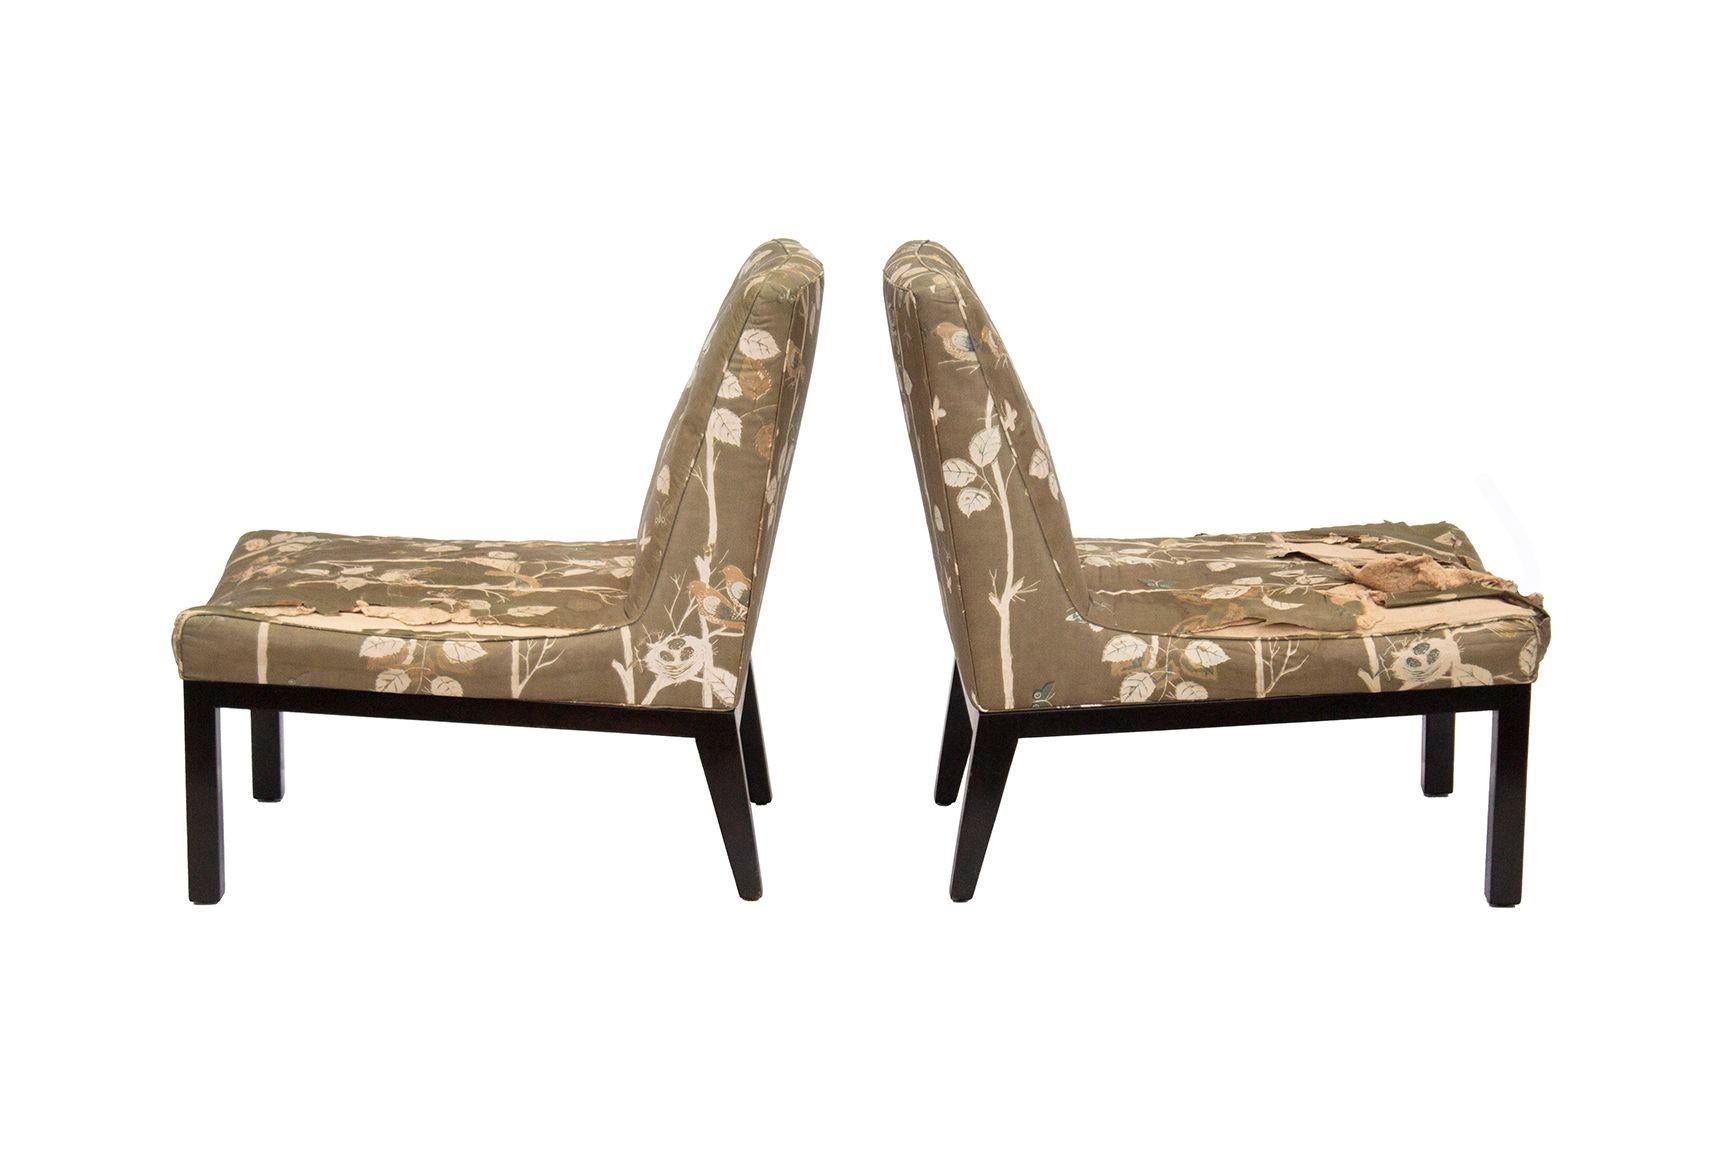 Mid-20th Century Tufted Slipper Chairs by Edward Wormley for Dunbar, pair For Sale